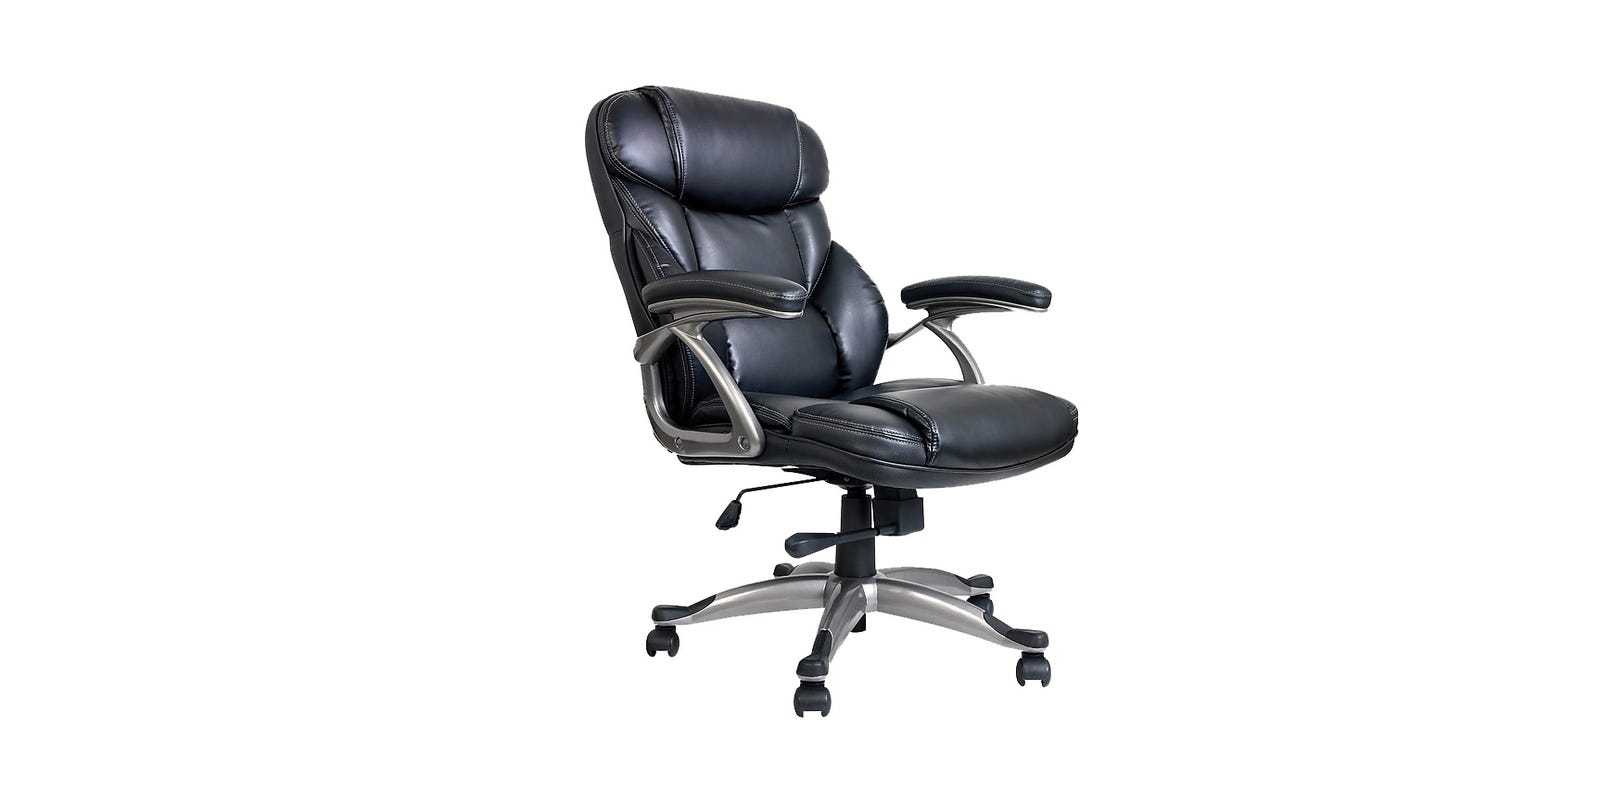 Staples Office Chairs Sale Get Work From Home Seating For Less